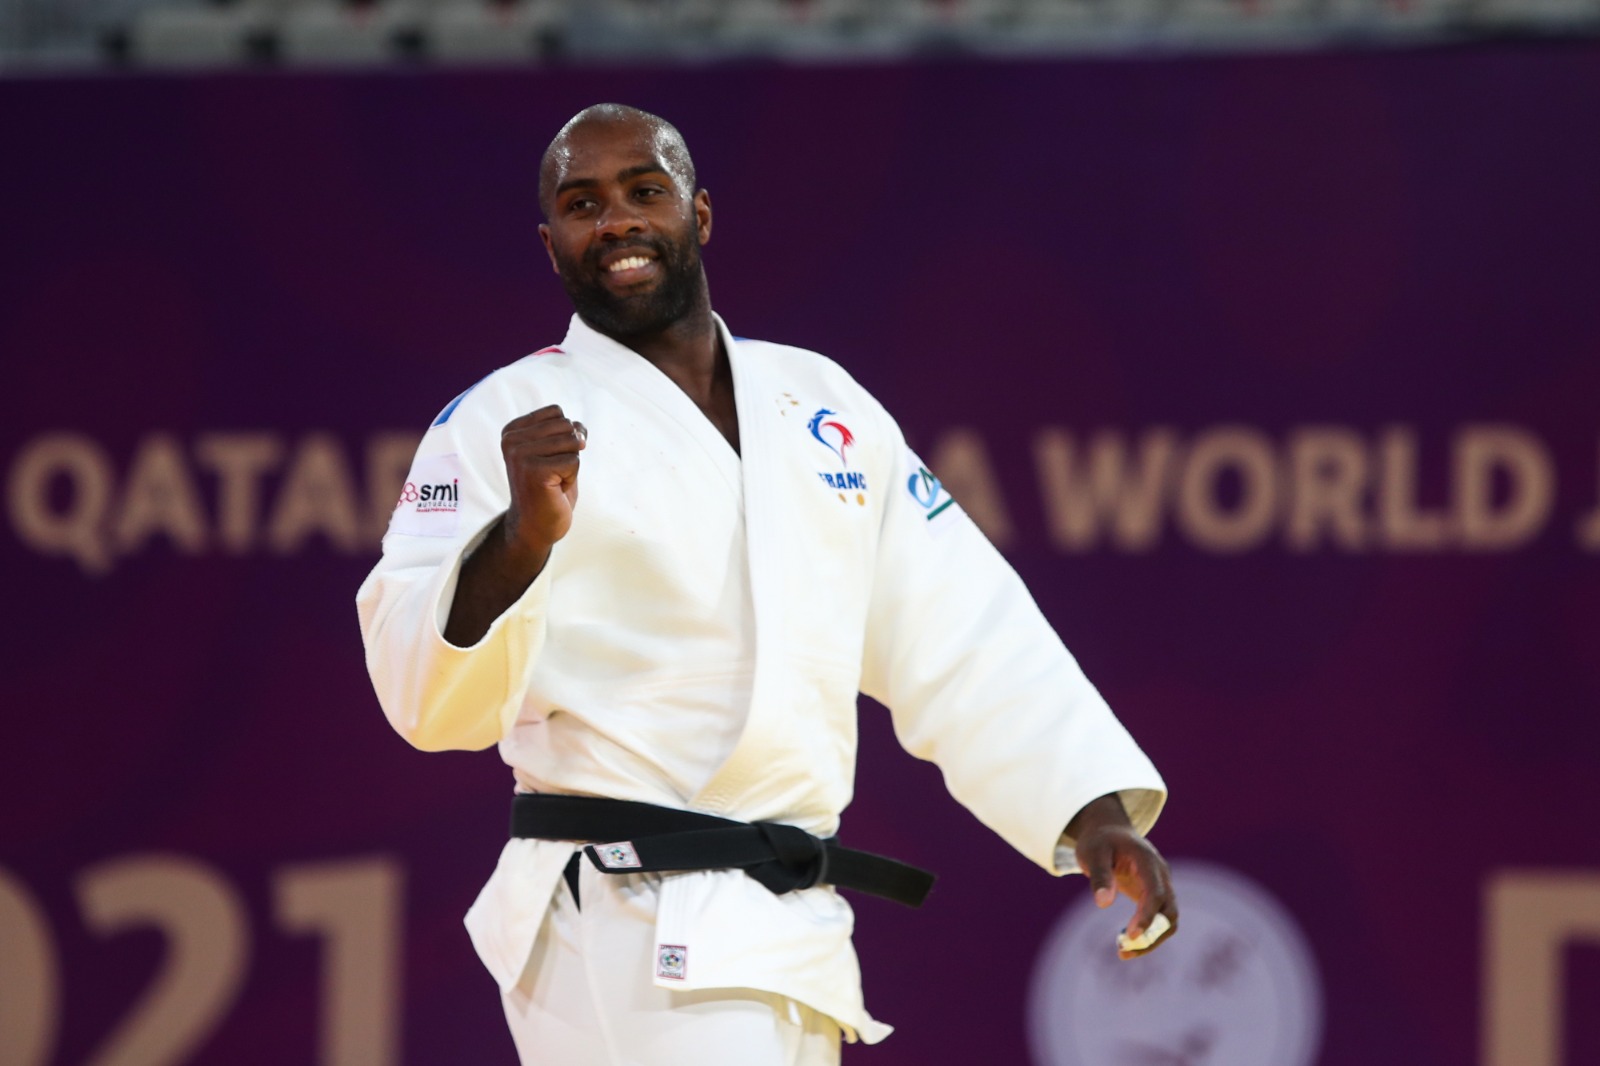 NORMAL SERVICE RESUMES AS RINER TAKES FOURTH MASTERS TITLE